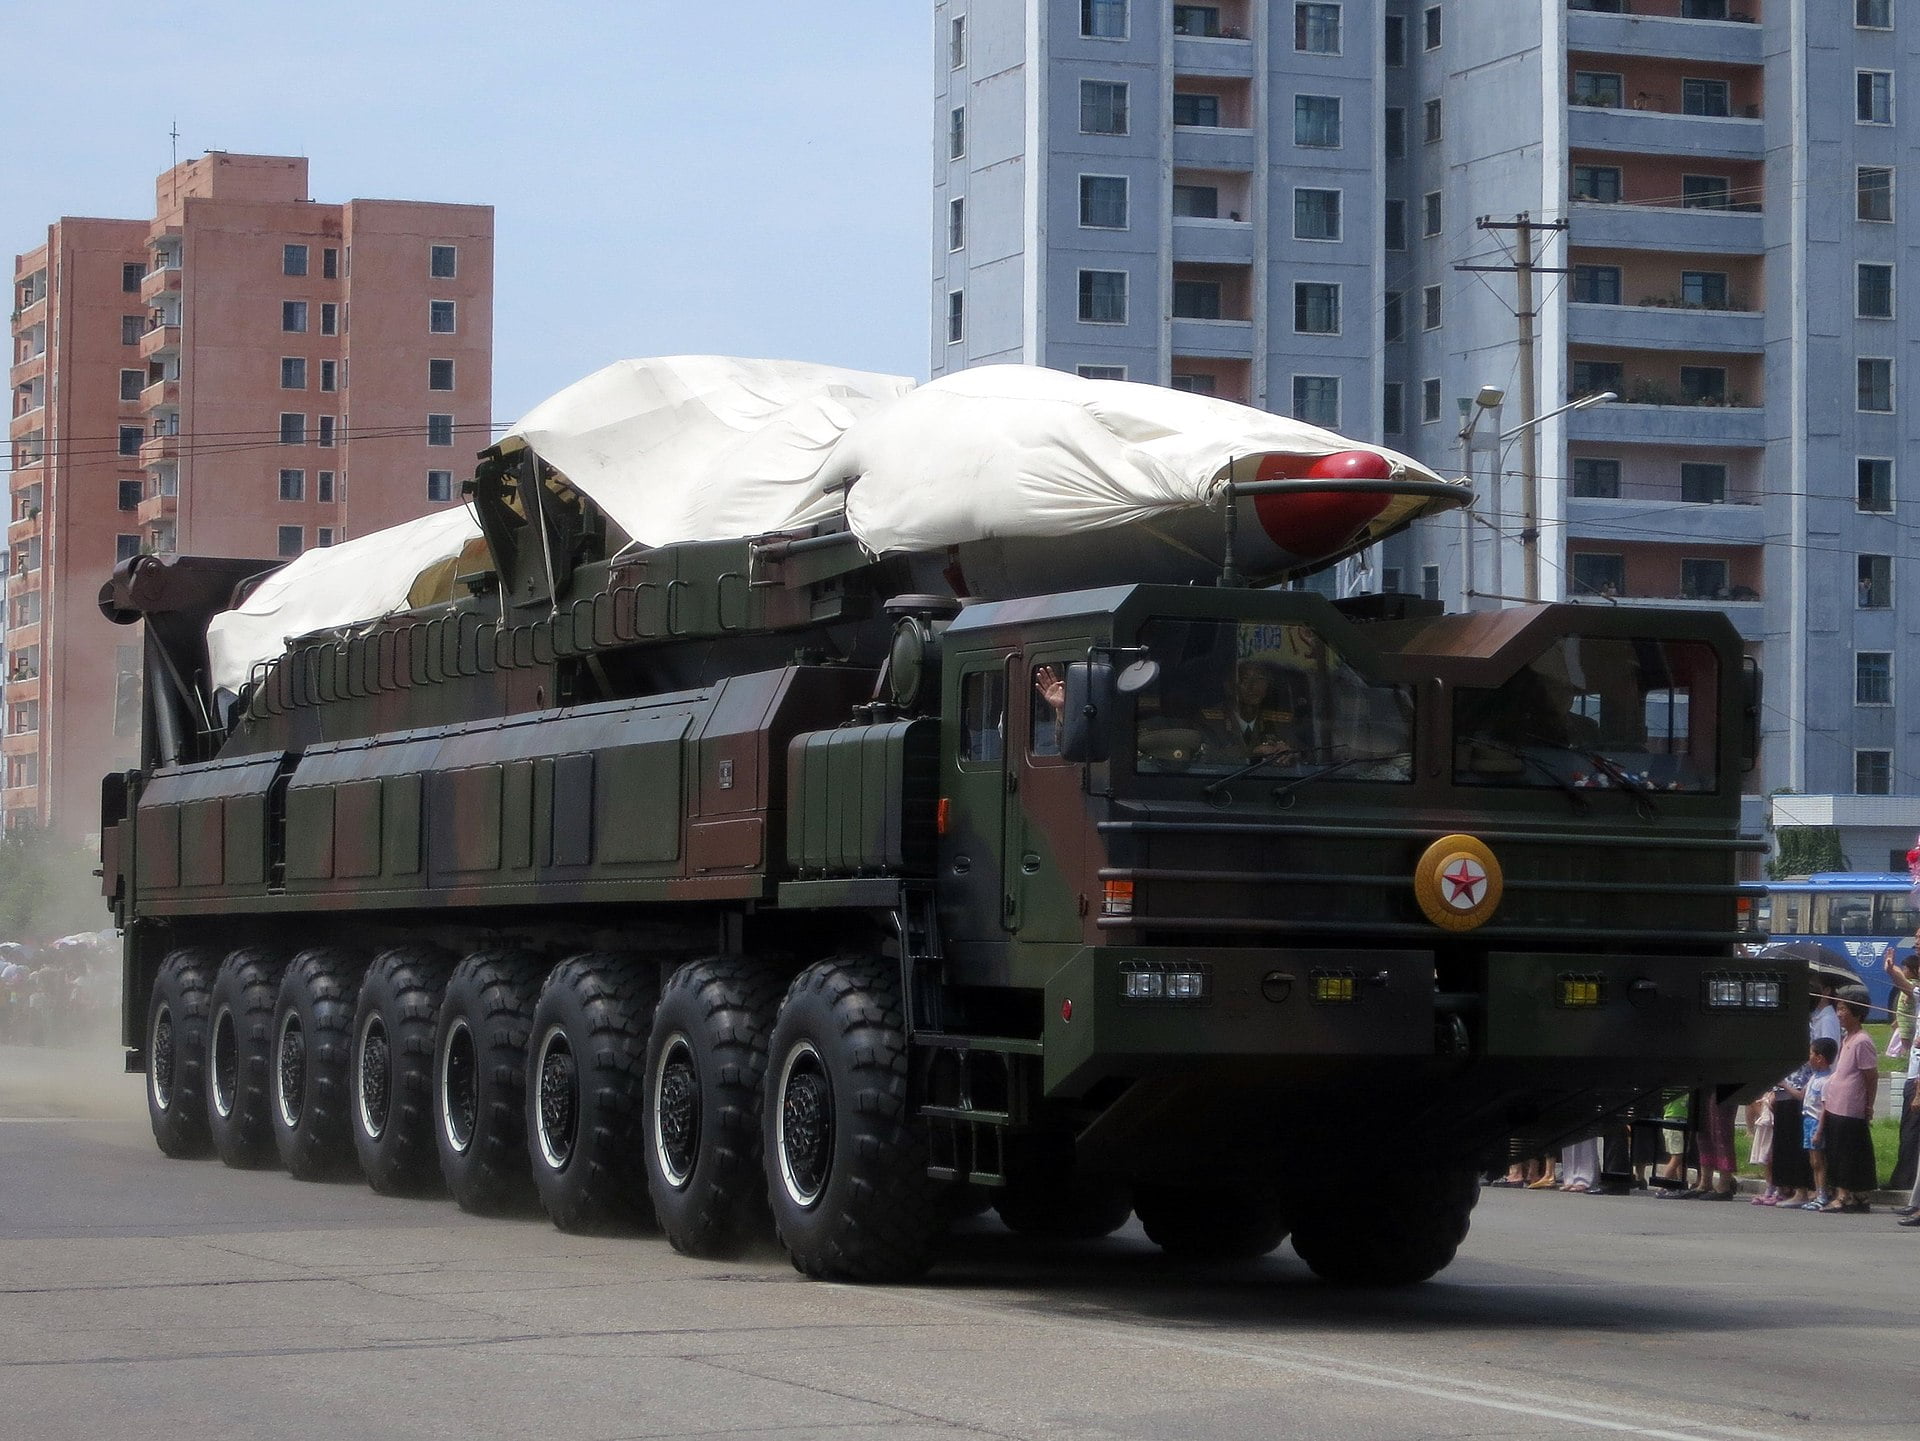 North Korean ballistic missile and carrier in their victory day parade openly defy major power deterrents.